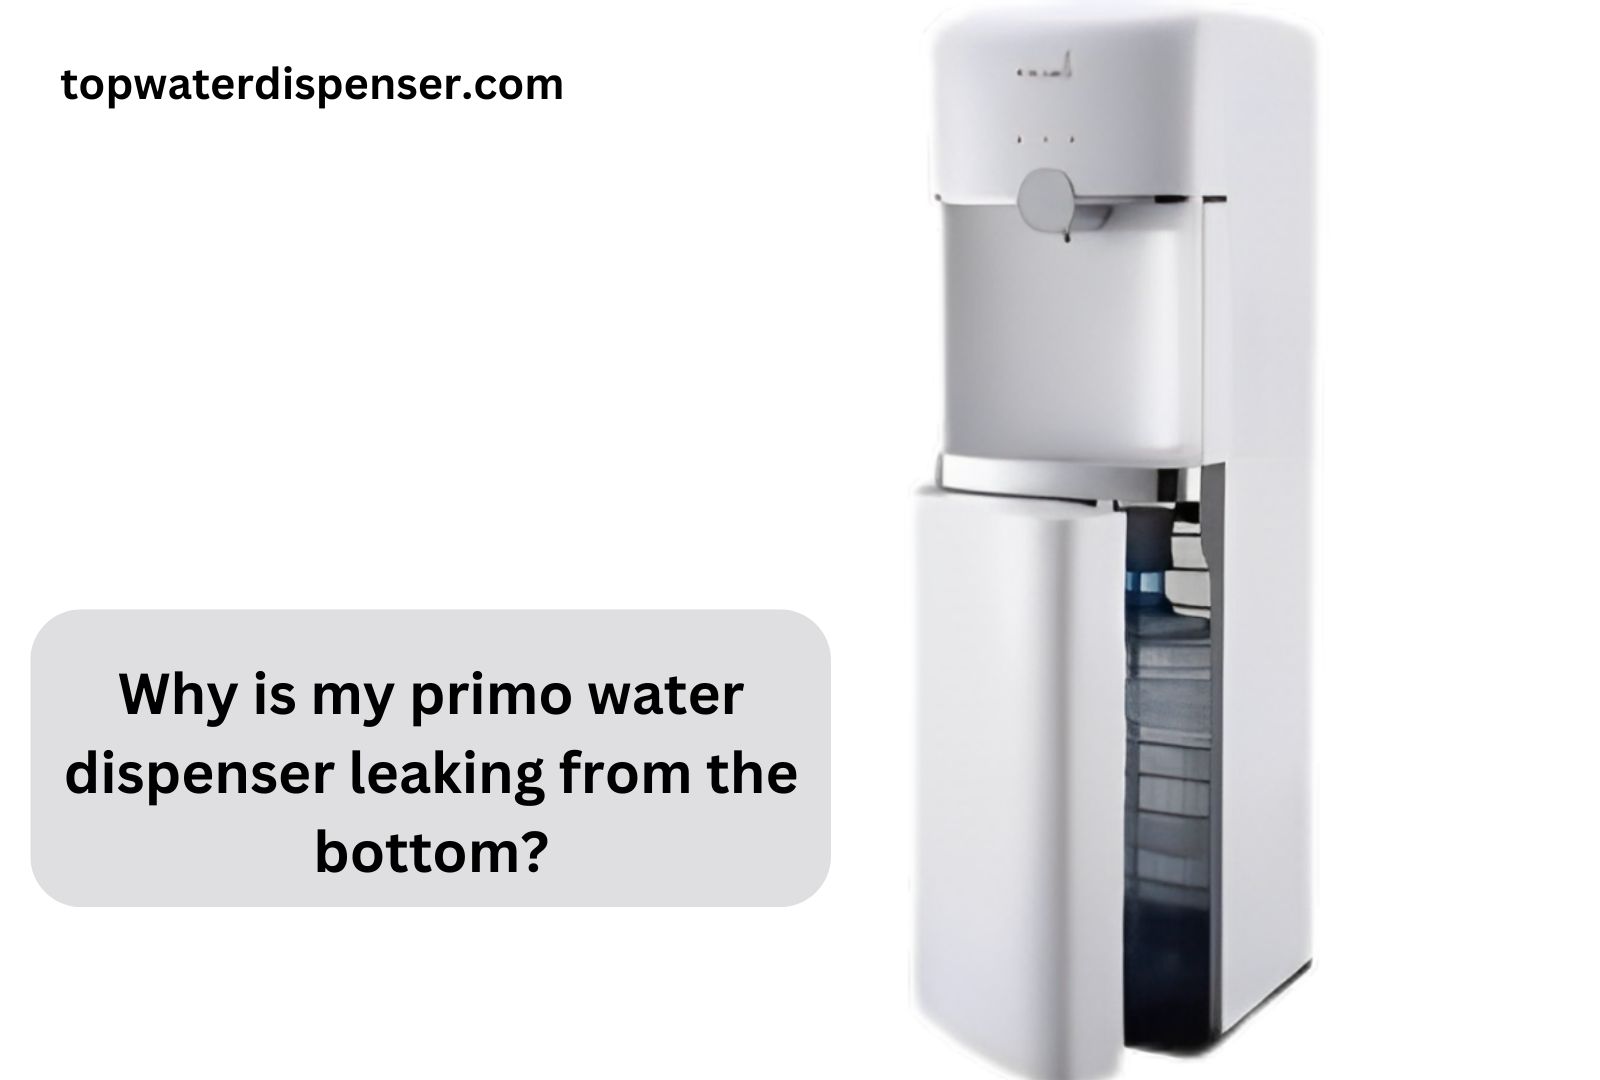 Why is my primo water dispenser leaking from the bottom?